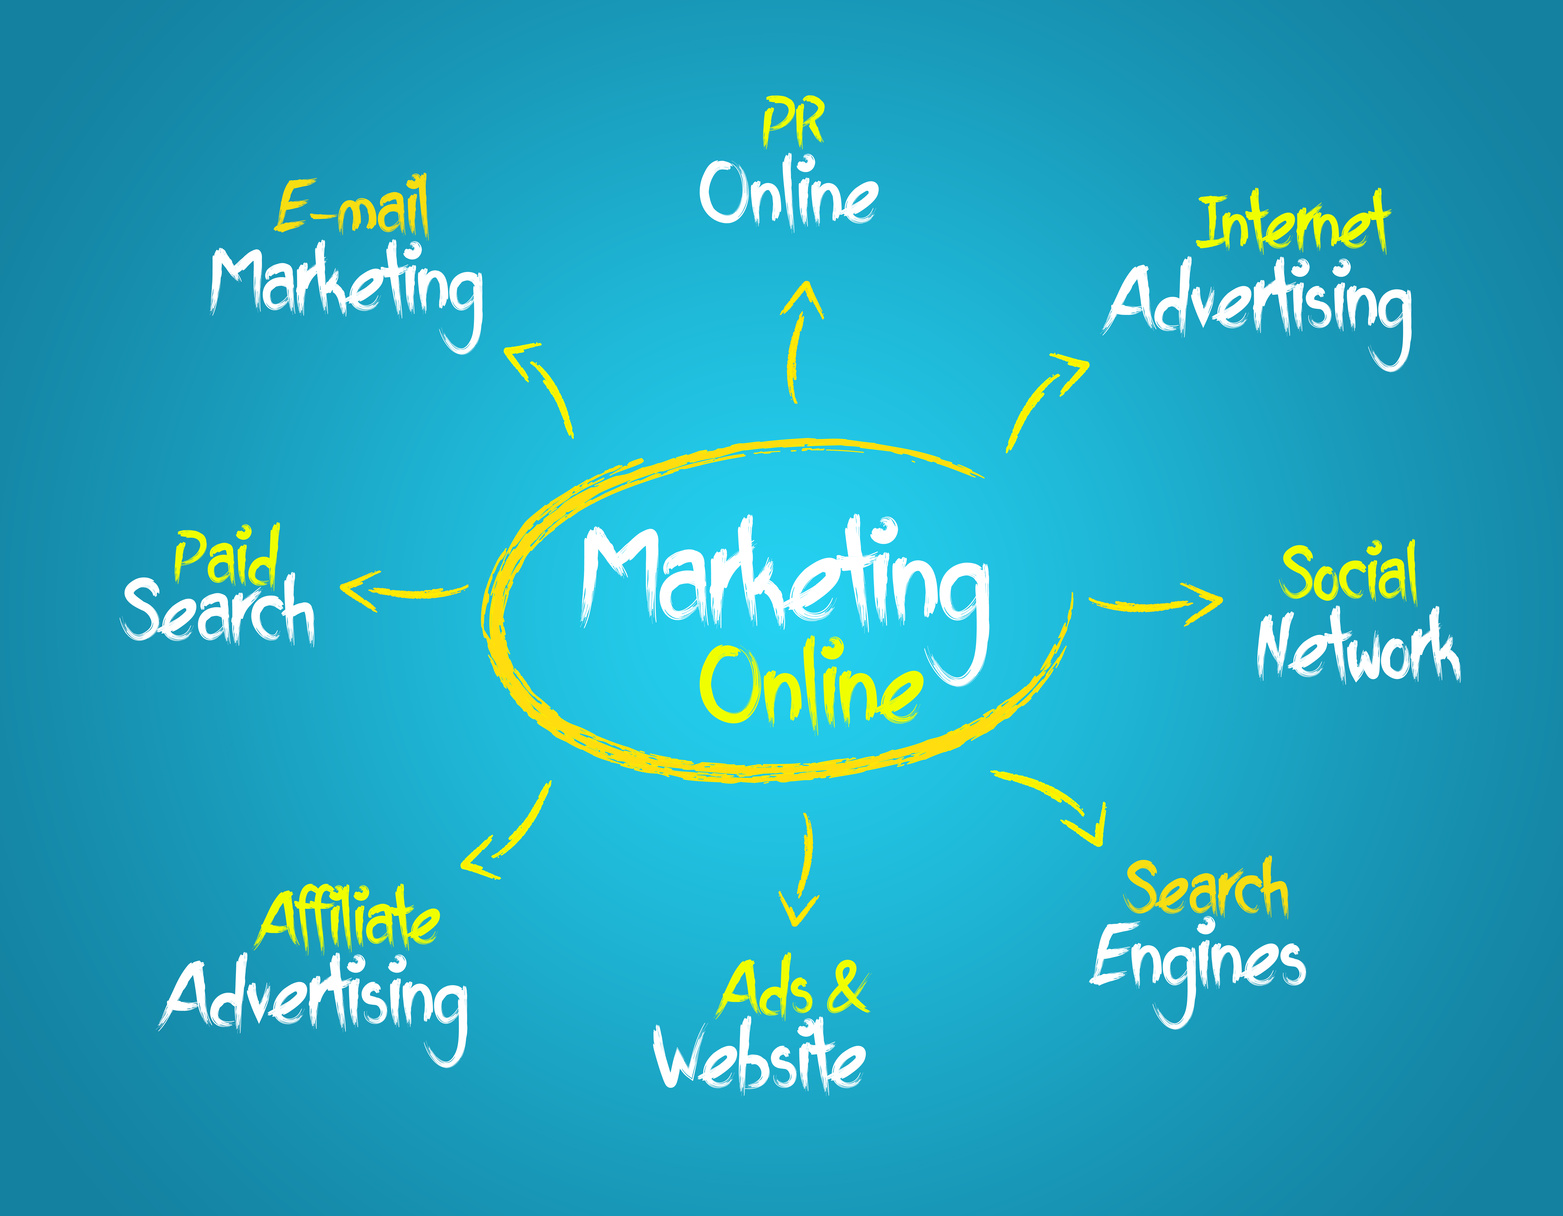 Online Marketing Is Not an Option; It’s a Must